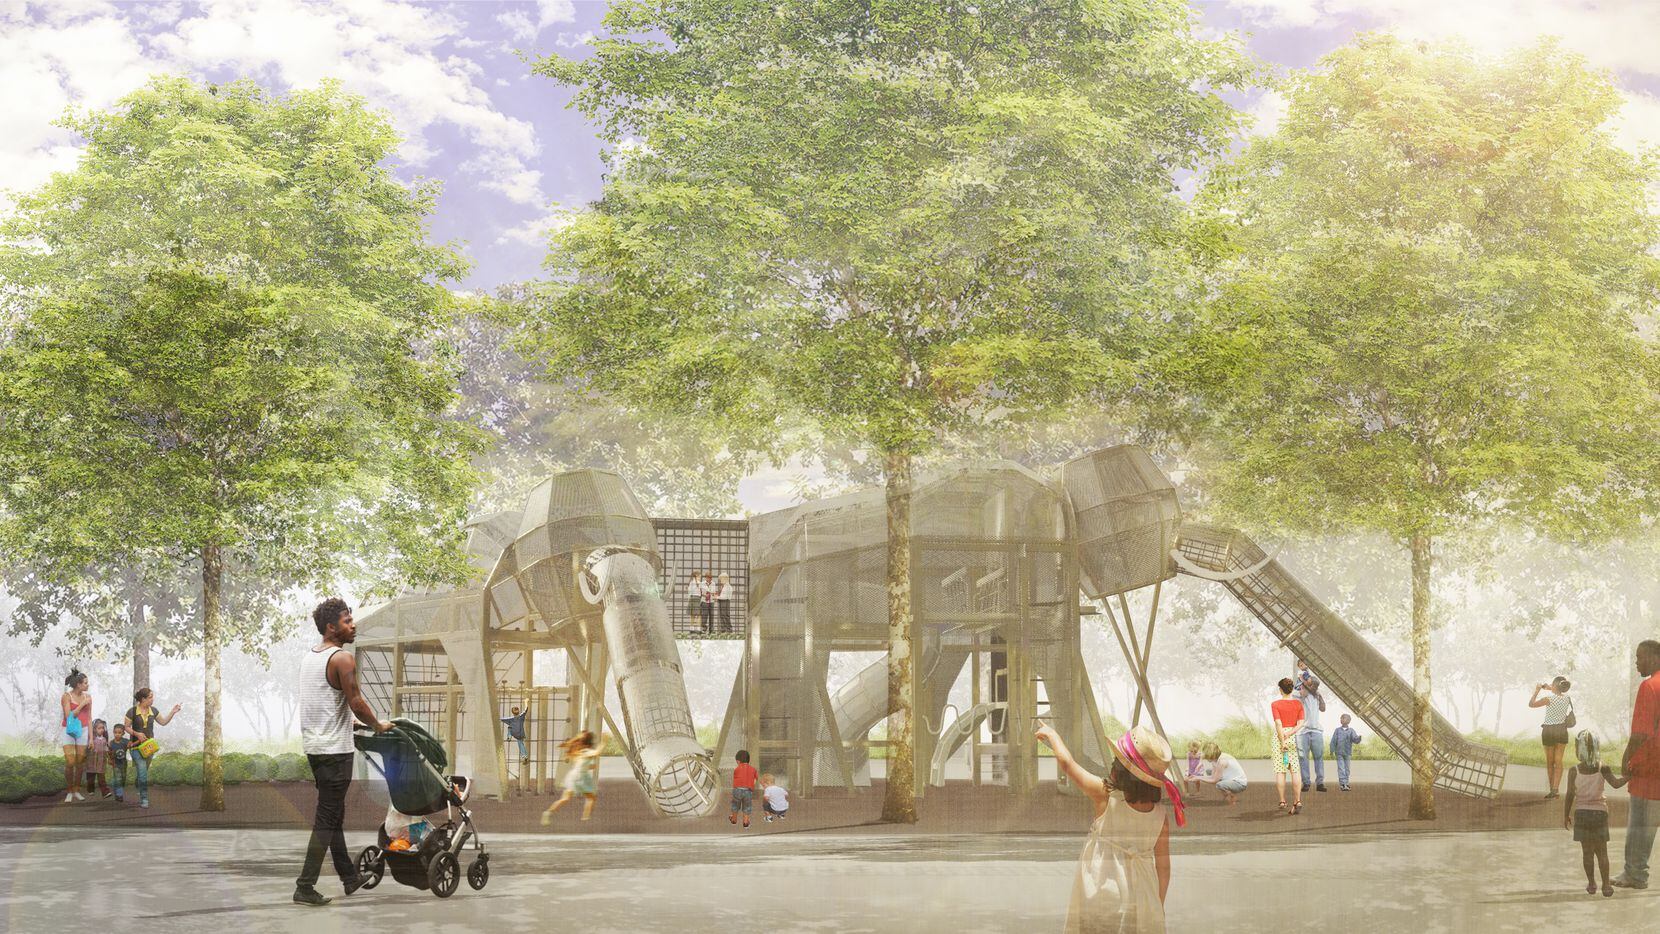 Landscape architect Christine Ten Eyck describes two of the play structures planned for the children's area of the new Harwood Park as “ghost mammoths,” harkening back to the time 100,000 years ago when Columbian mammoths roamed what is now downtown Dallas.